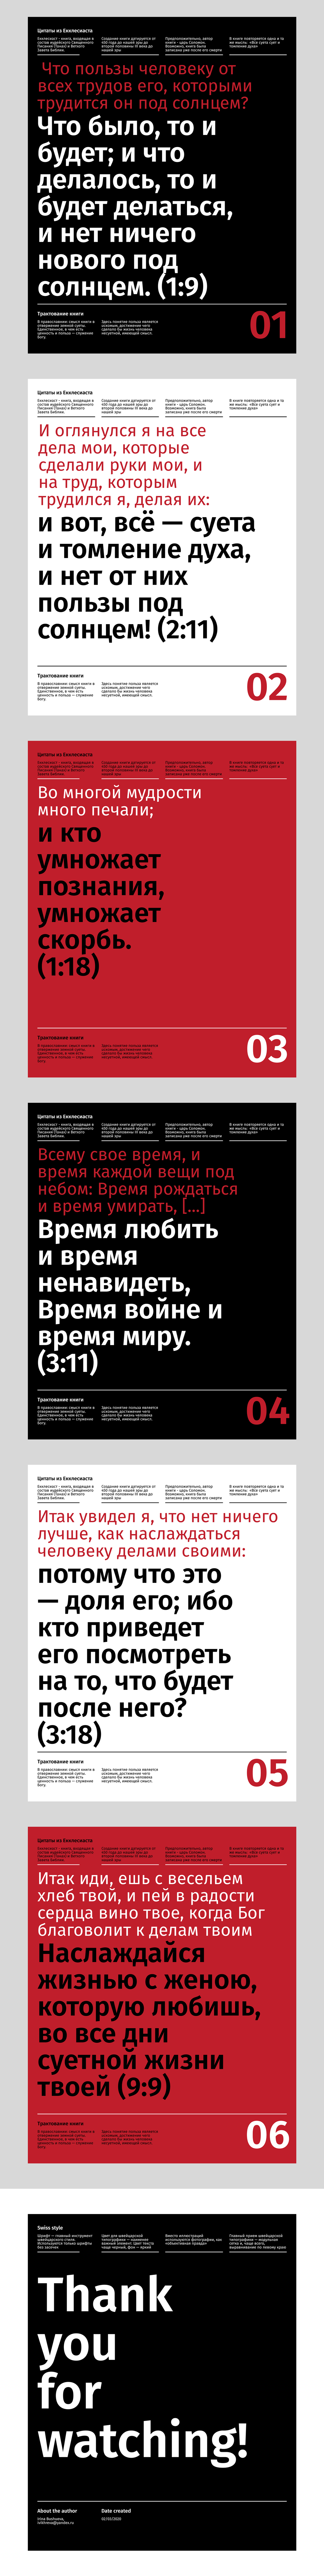 poster swiss style typography   UI